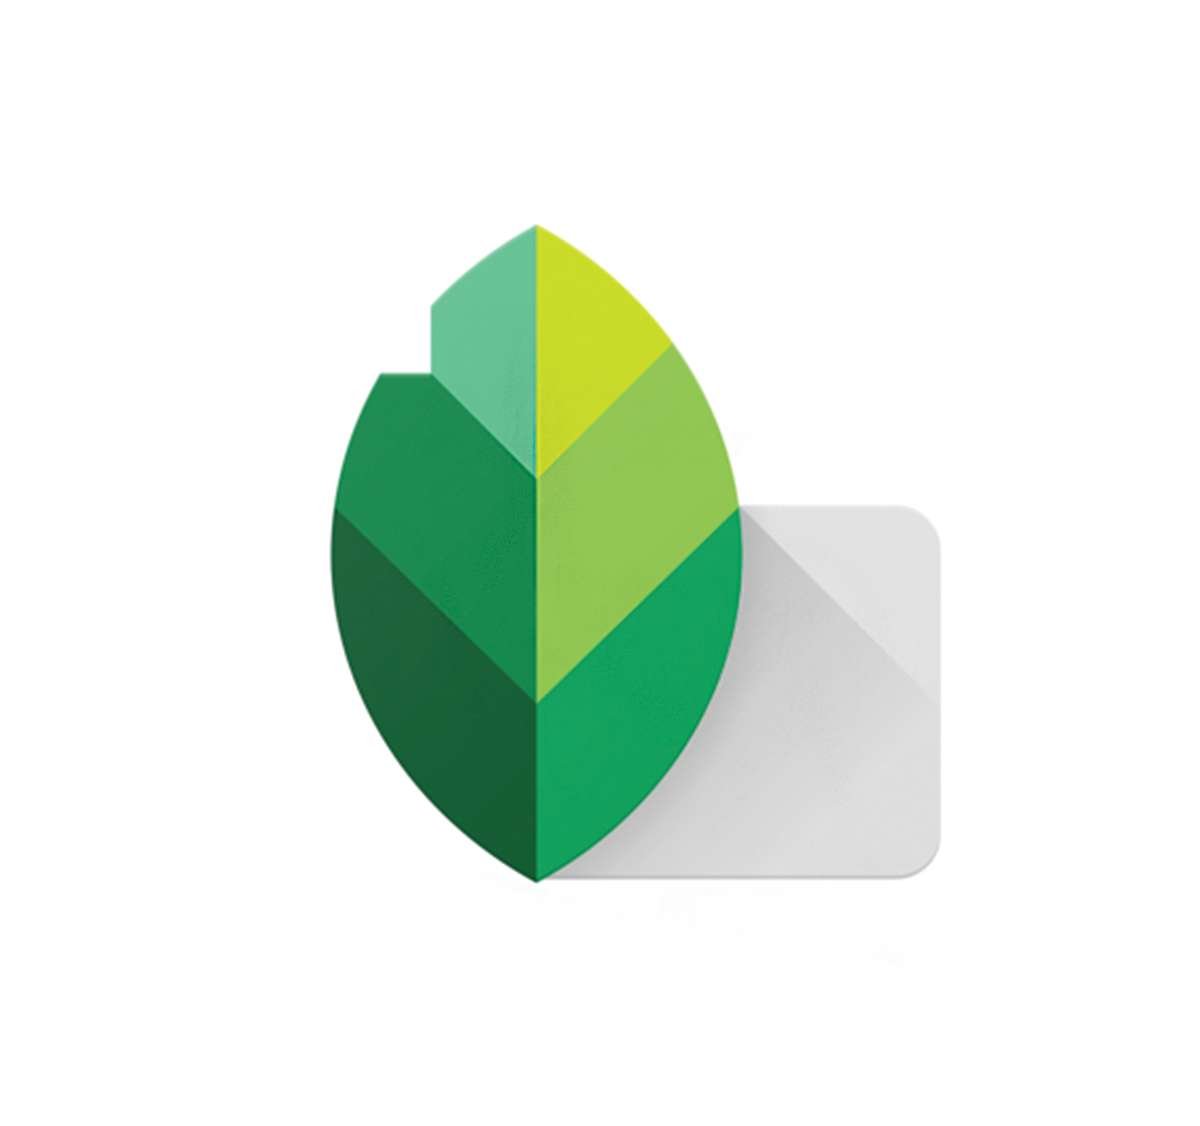 Snapseed app available on the App Store at Apple